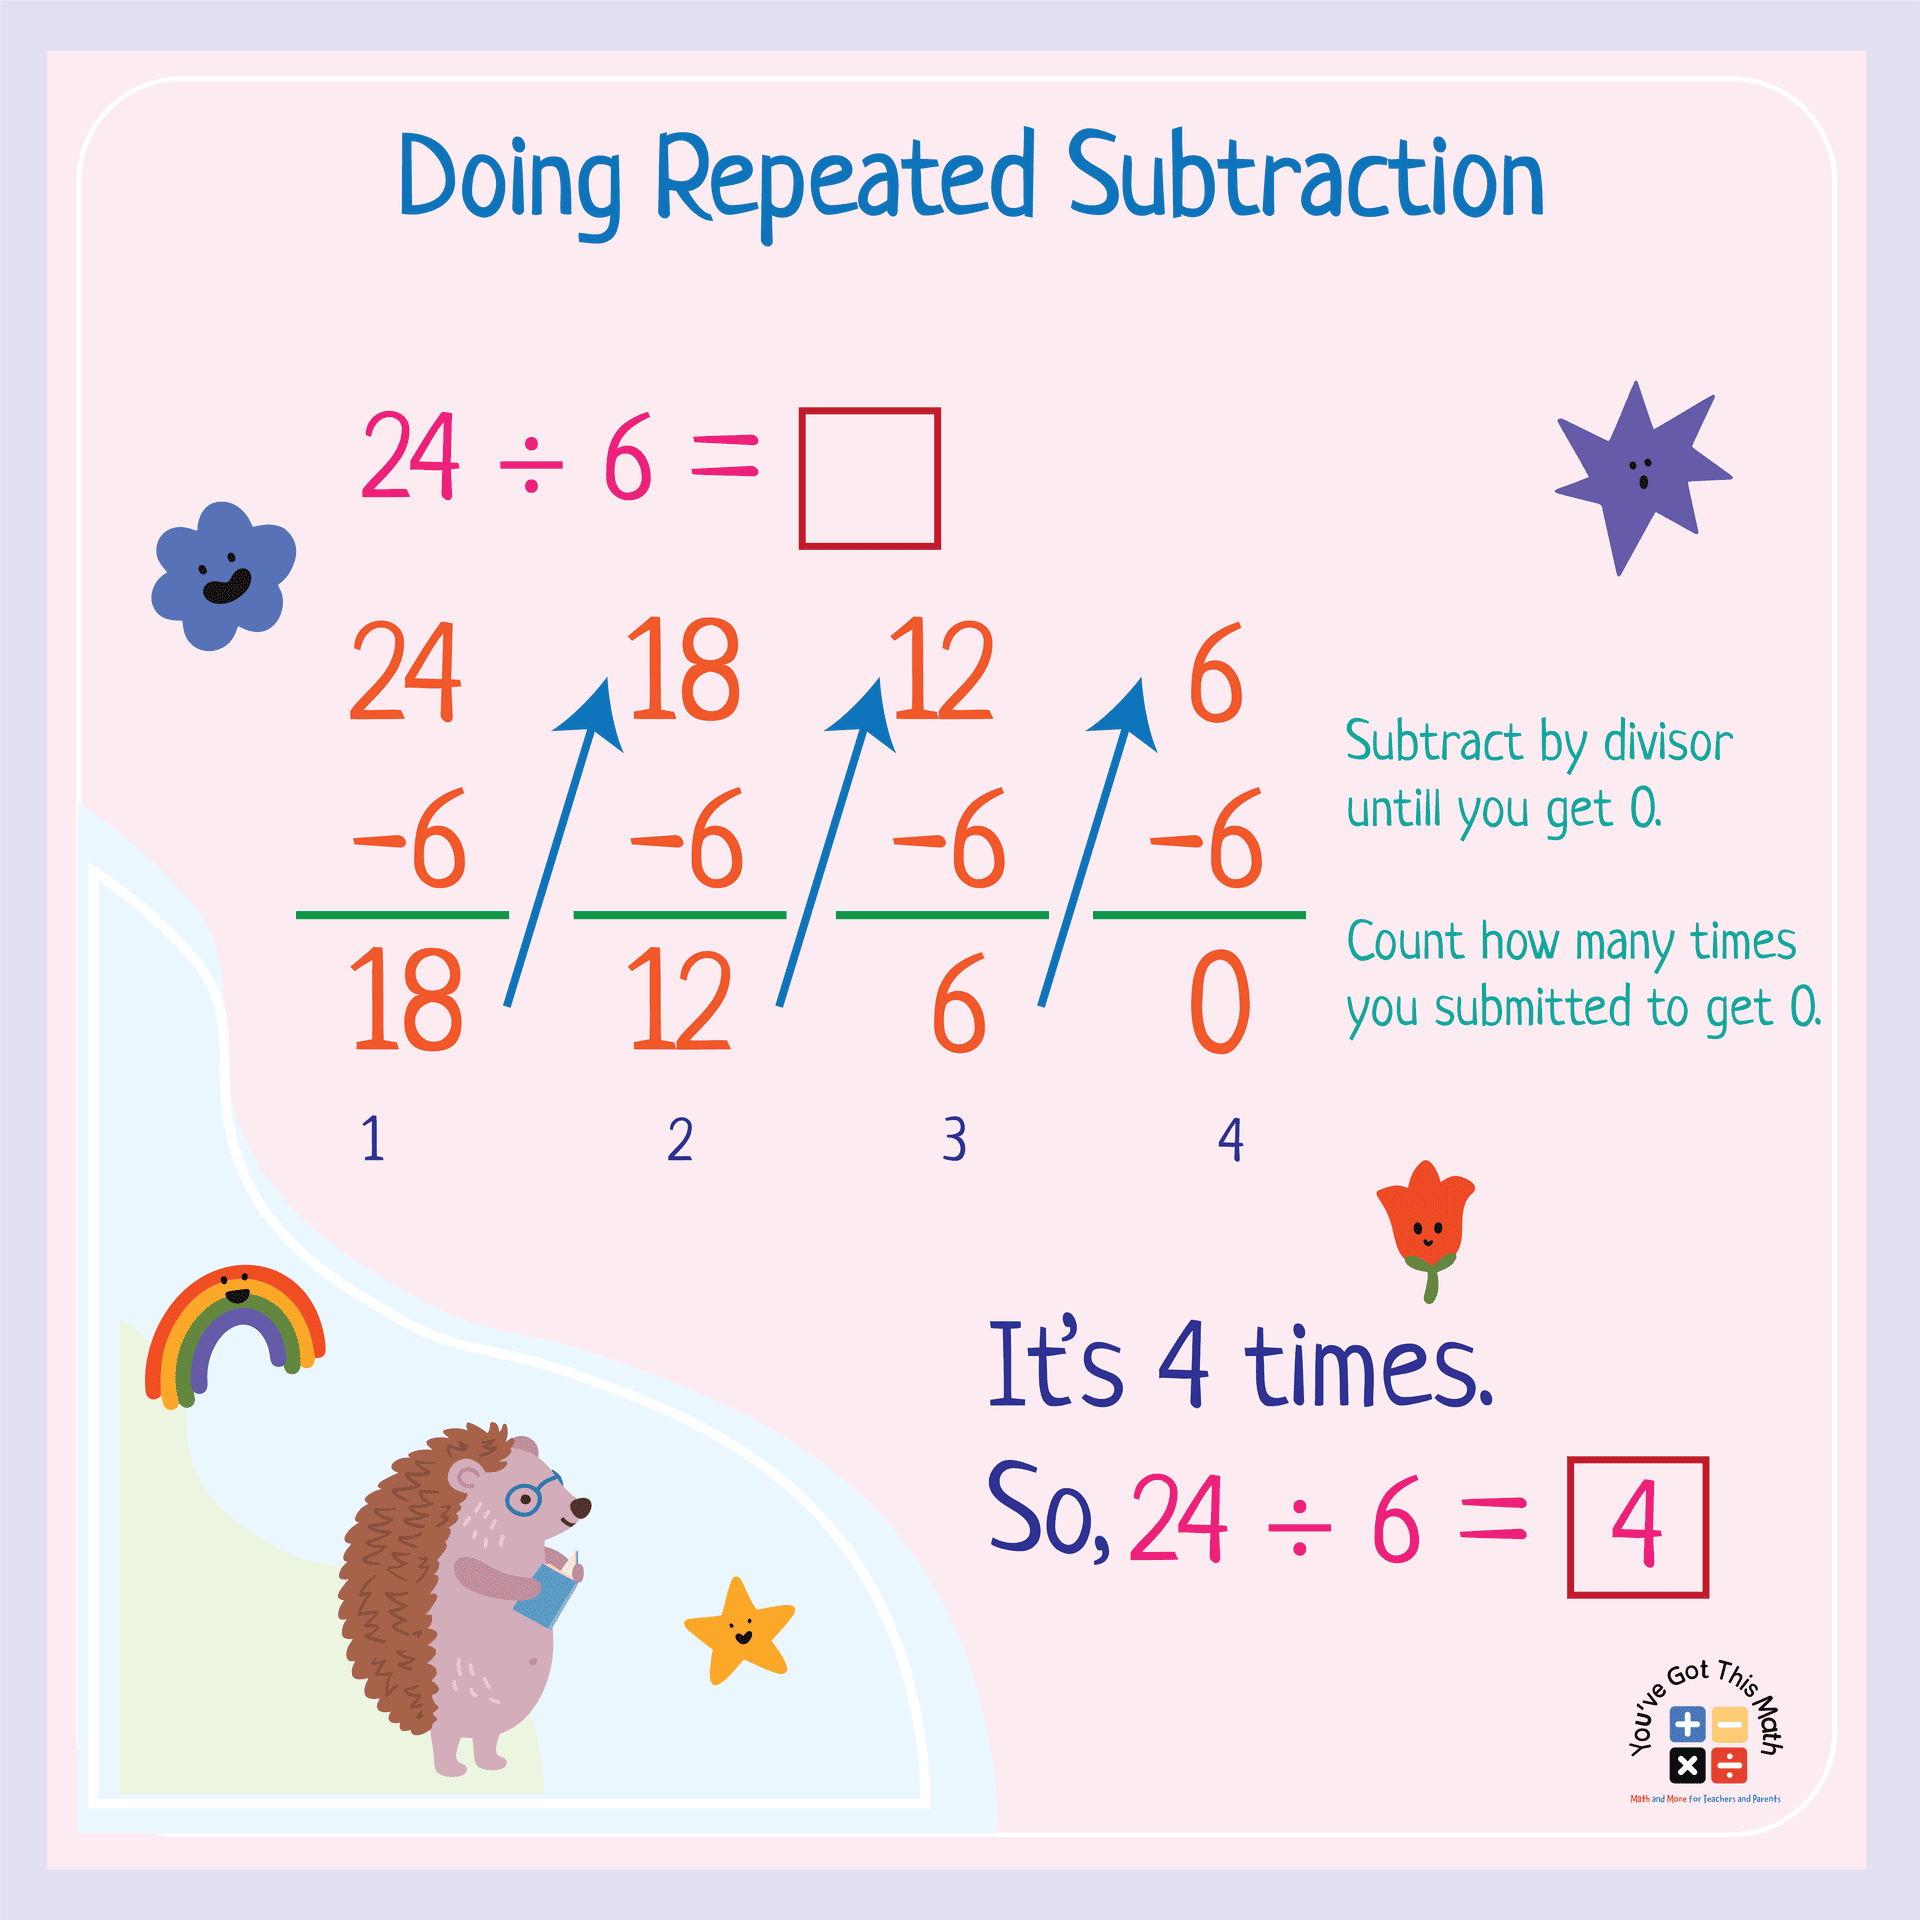 Doing Repeated Subtraction for Division Anchor Chart